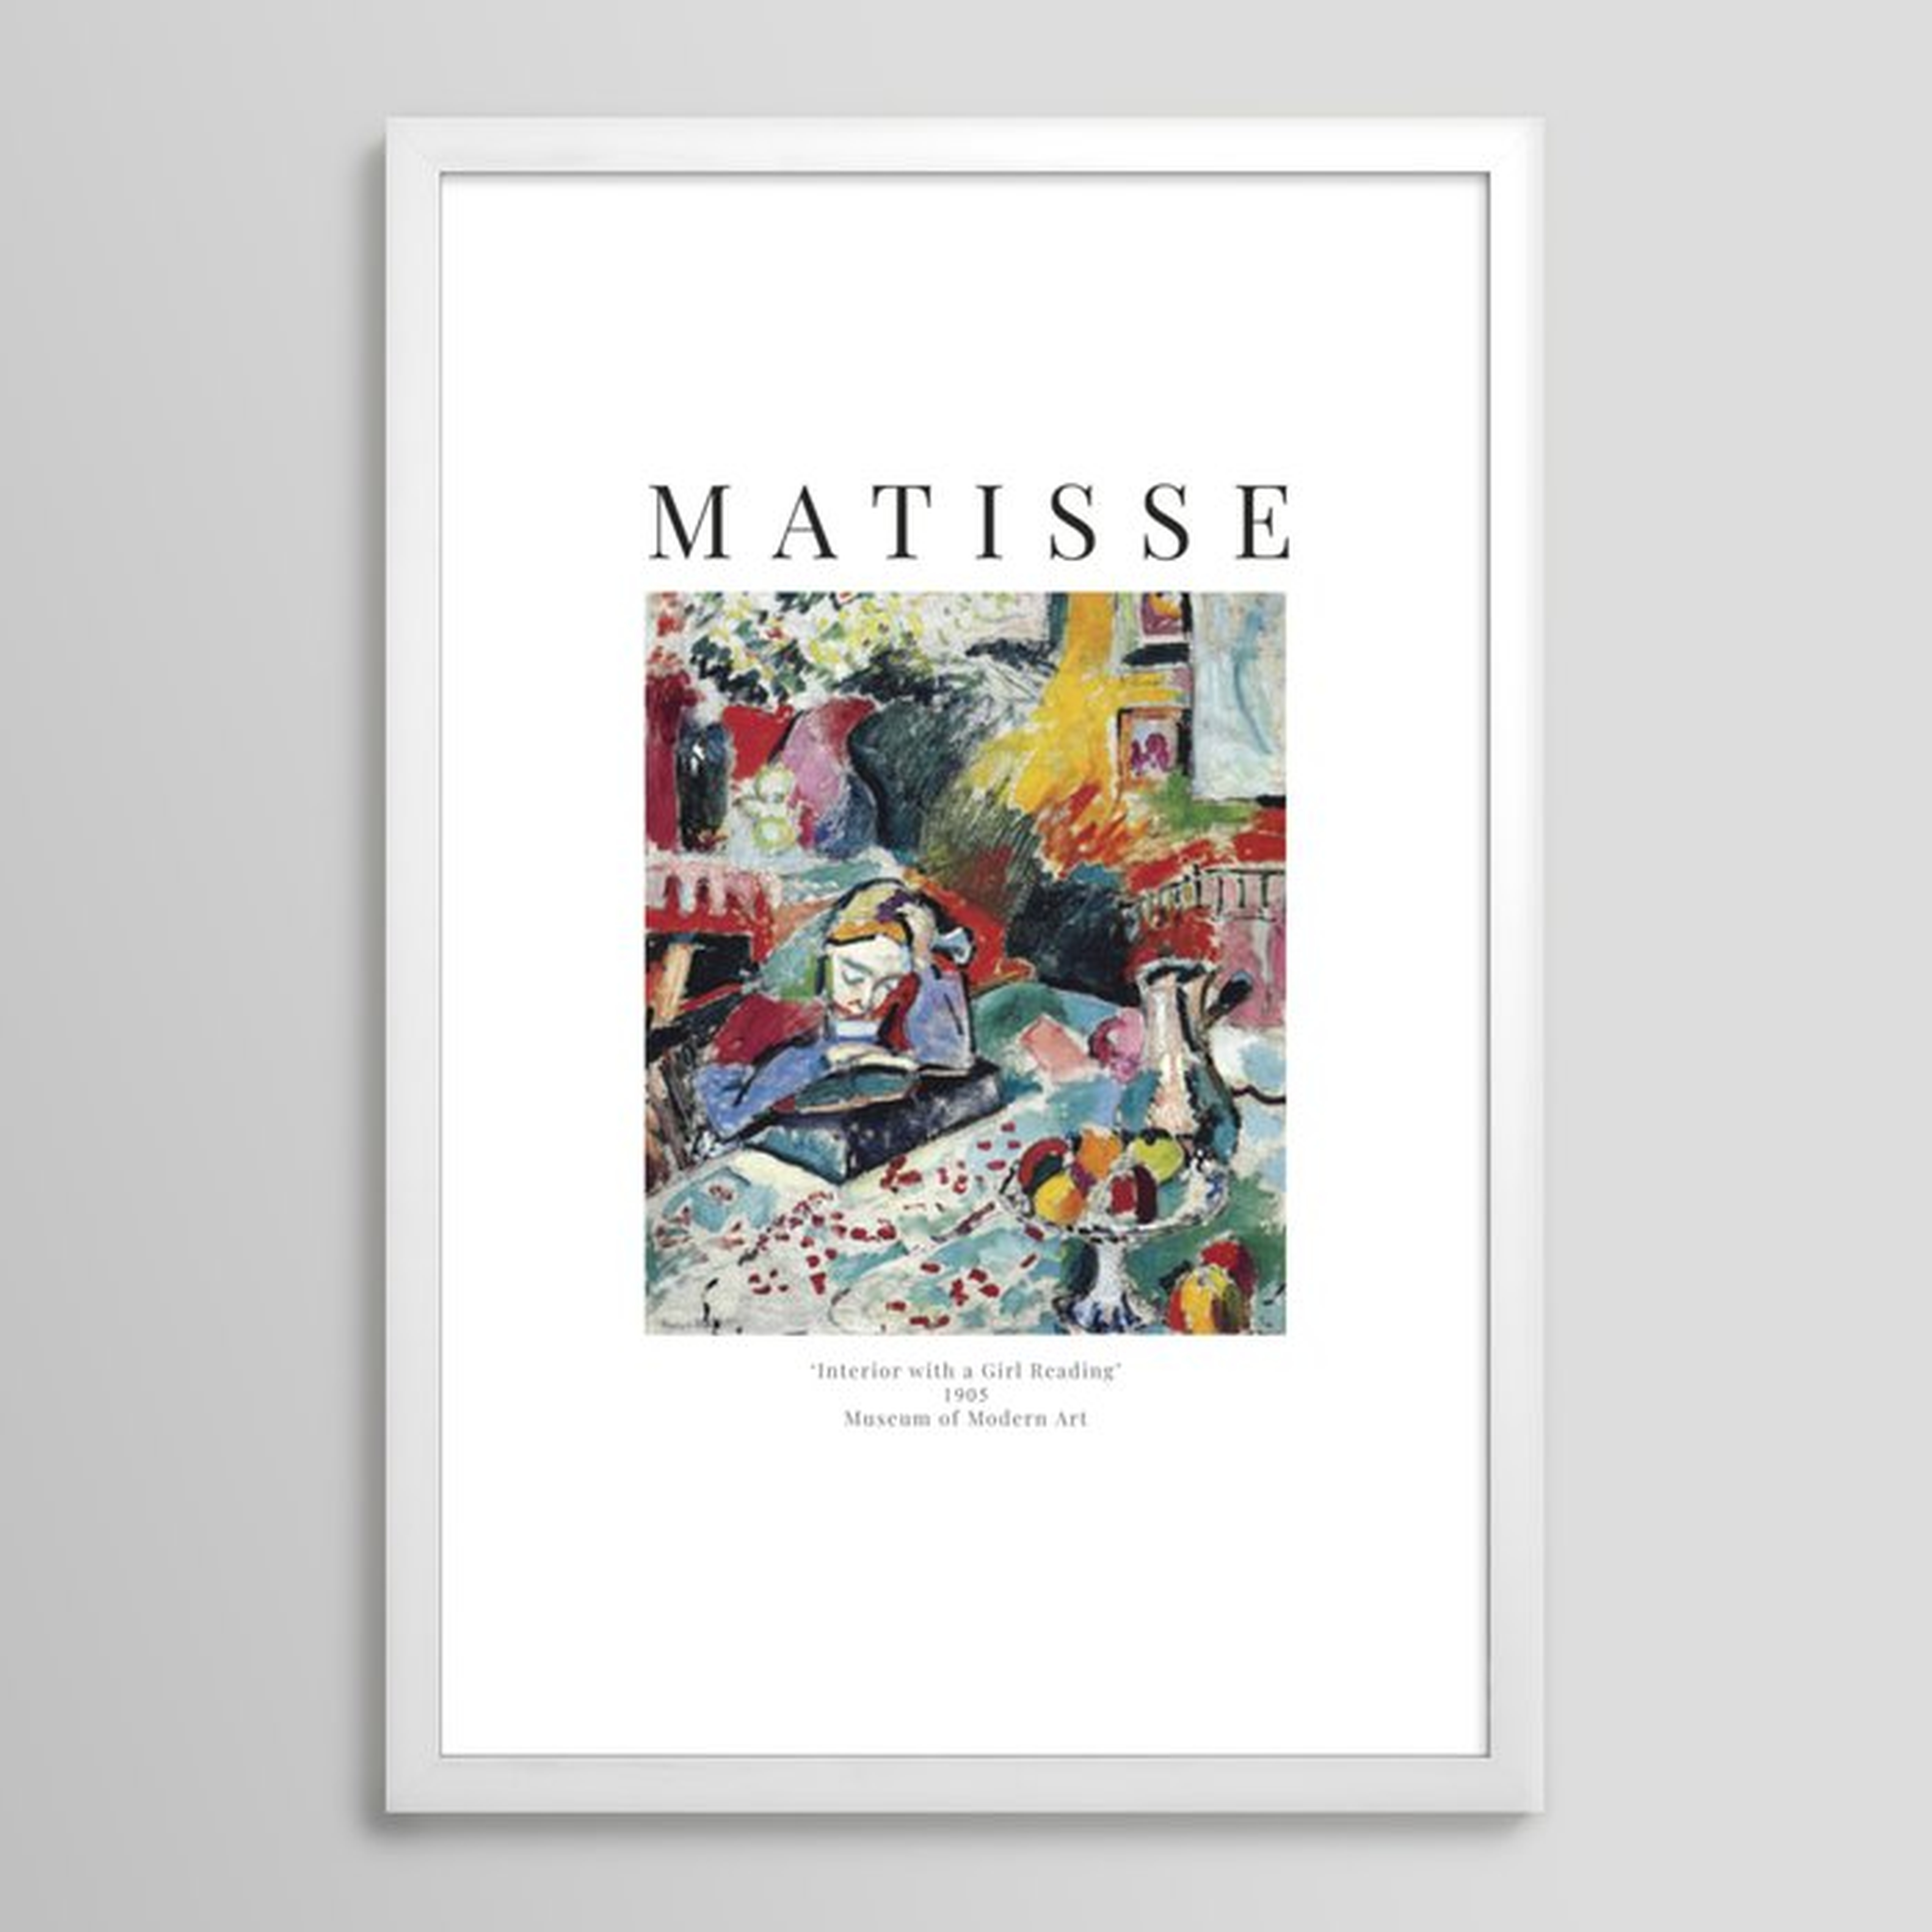 Interior with a Girl Reading - Henri Matisse - Exhibition Poster Framed Art Print - Society6